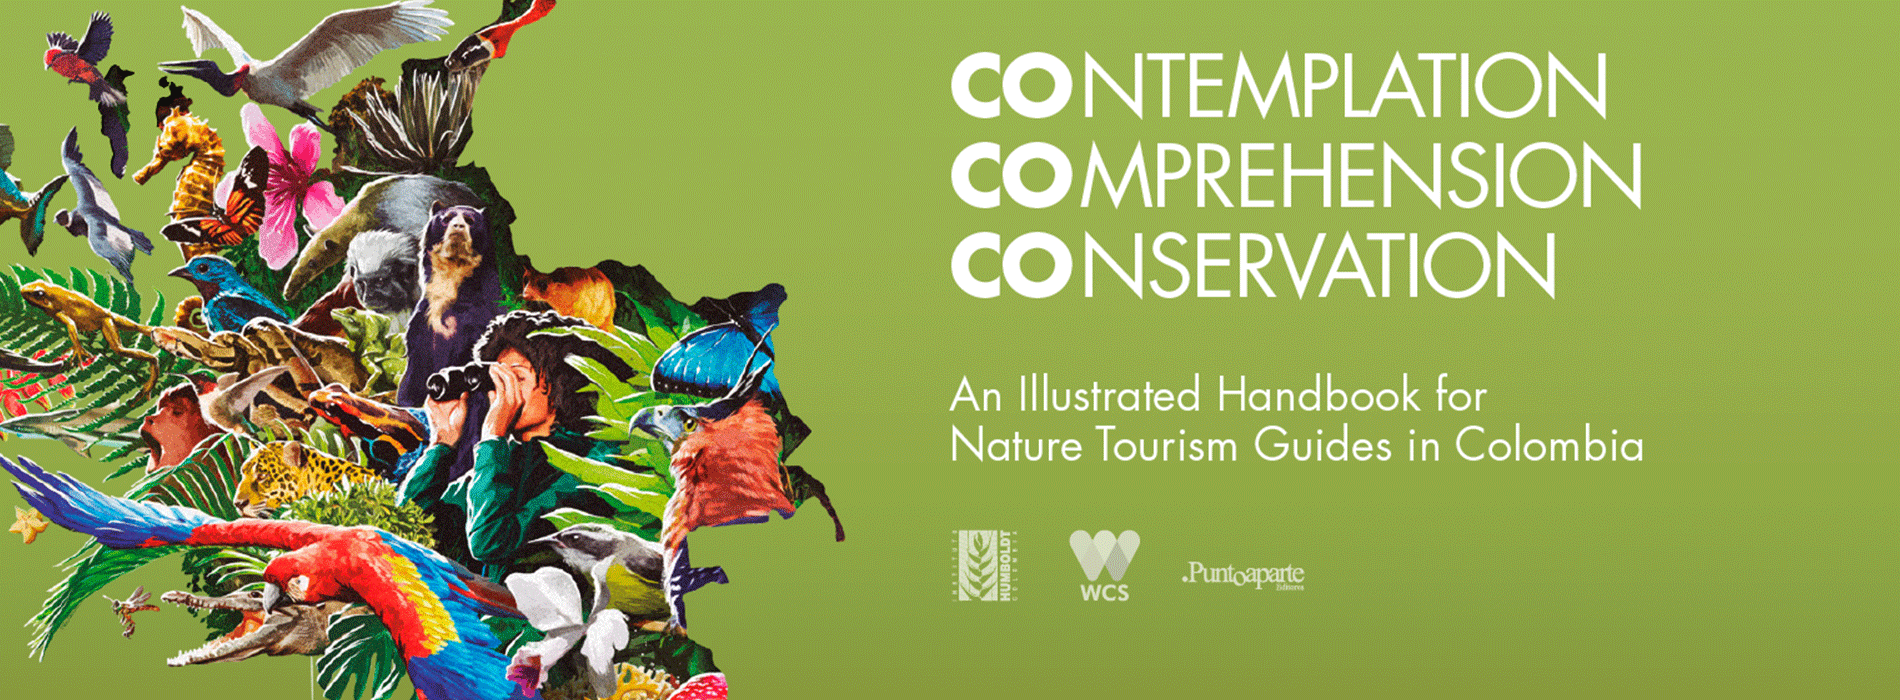 ProColombia Launches an Illustrative Handbook for Nature